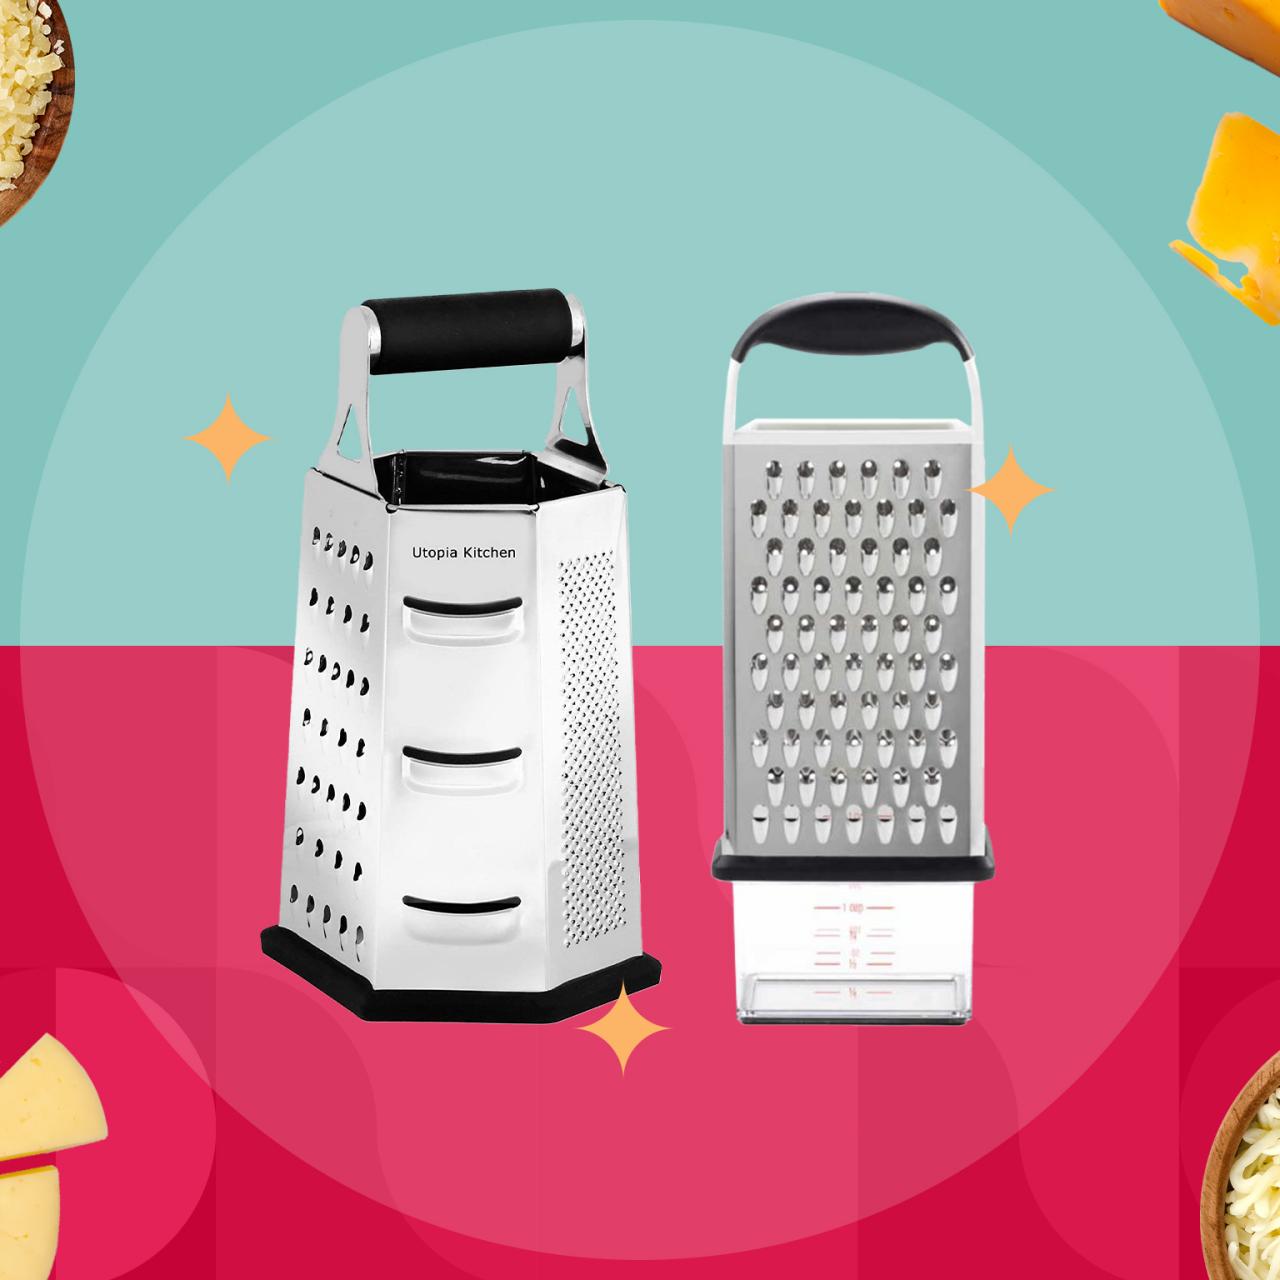 This Pantry Item Makes It Easier to Clean Your Cheese Grater